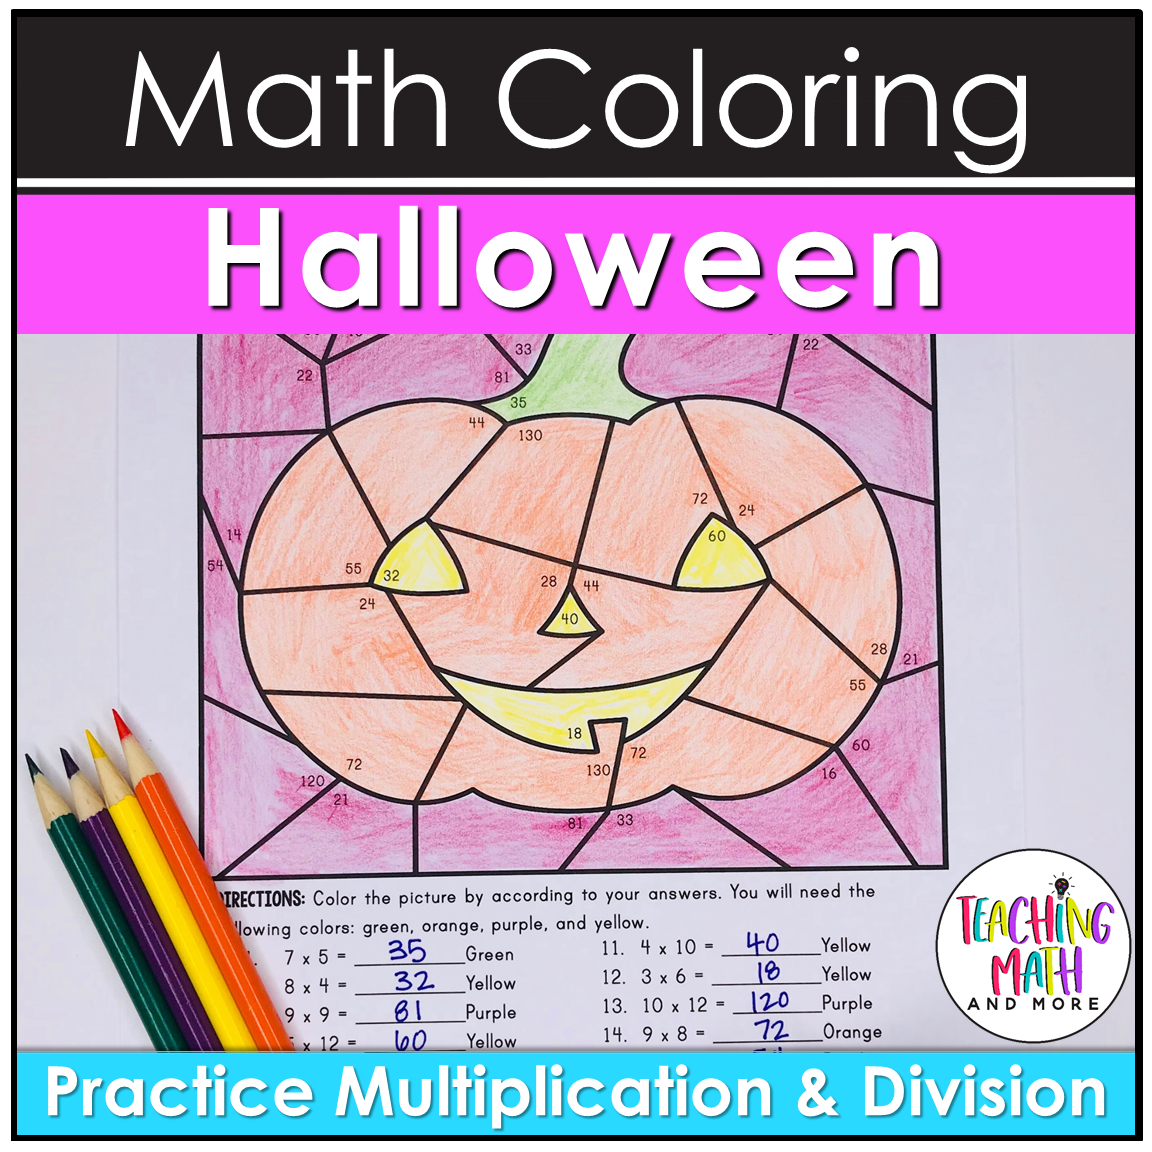 multiplication-color-by-number-math-worksheets-coloring-page-for-6th-grade-free-printable